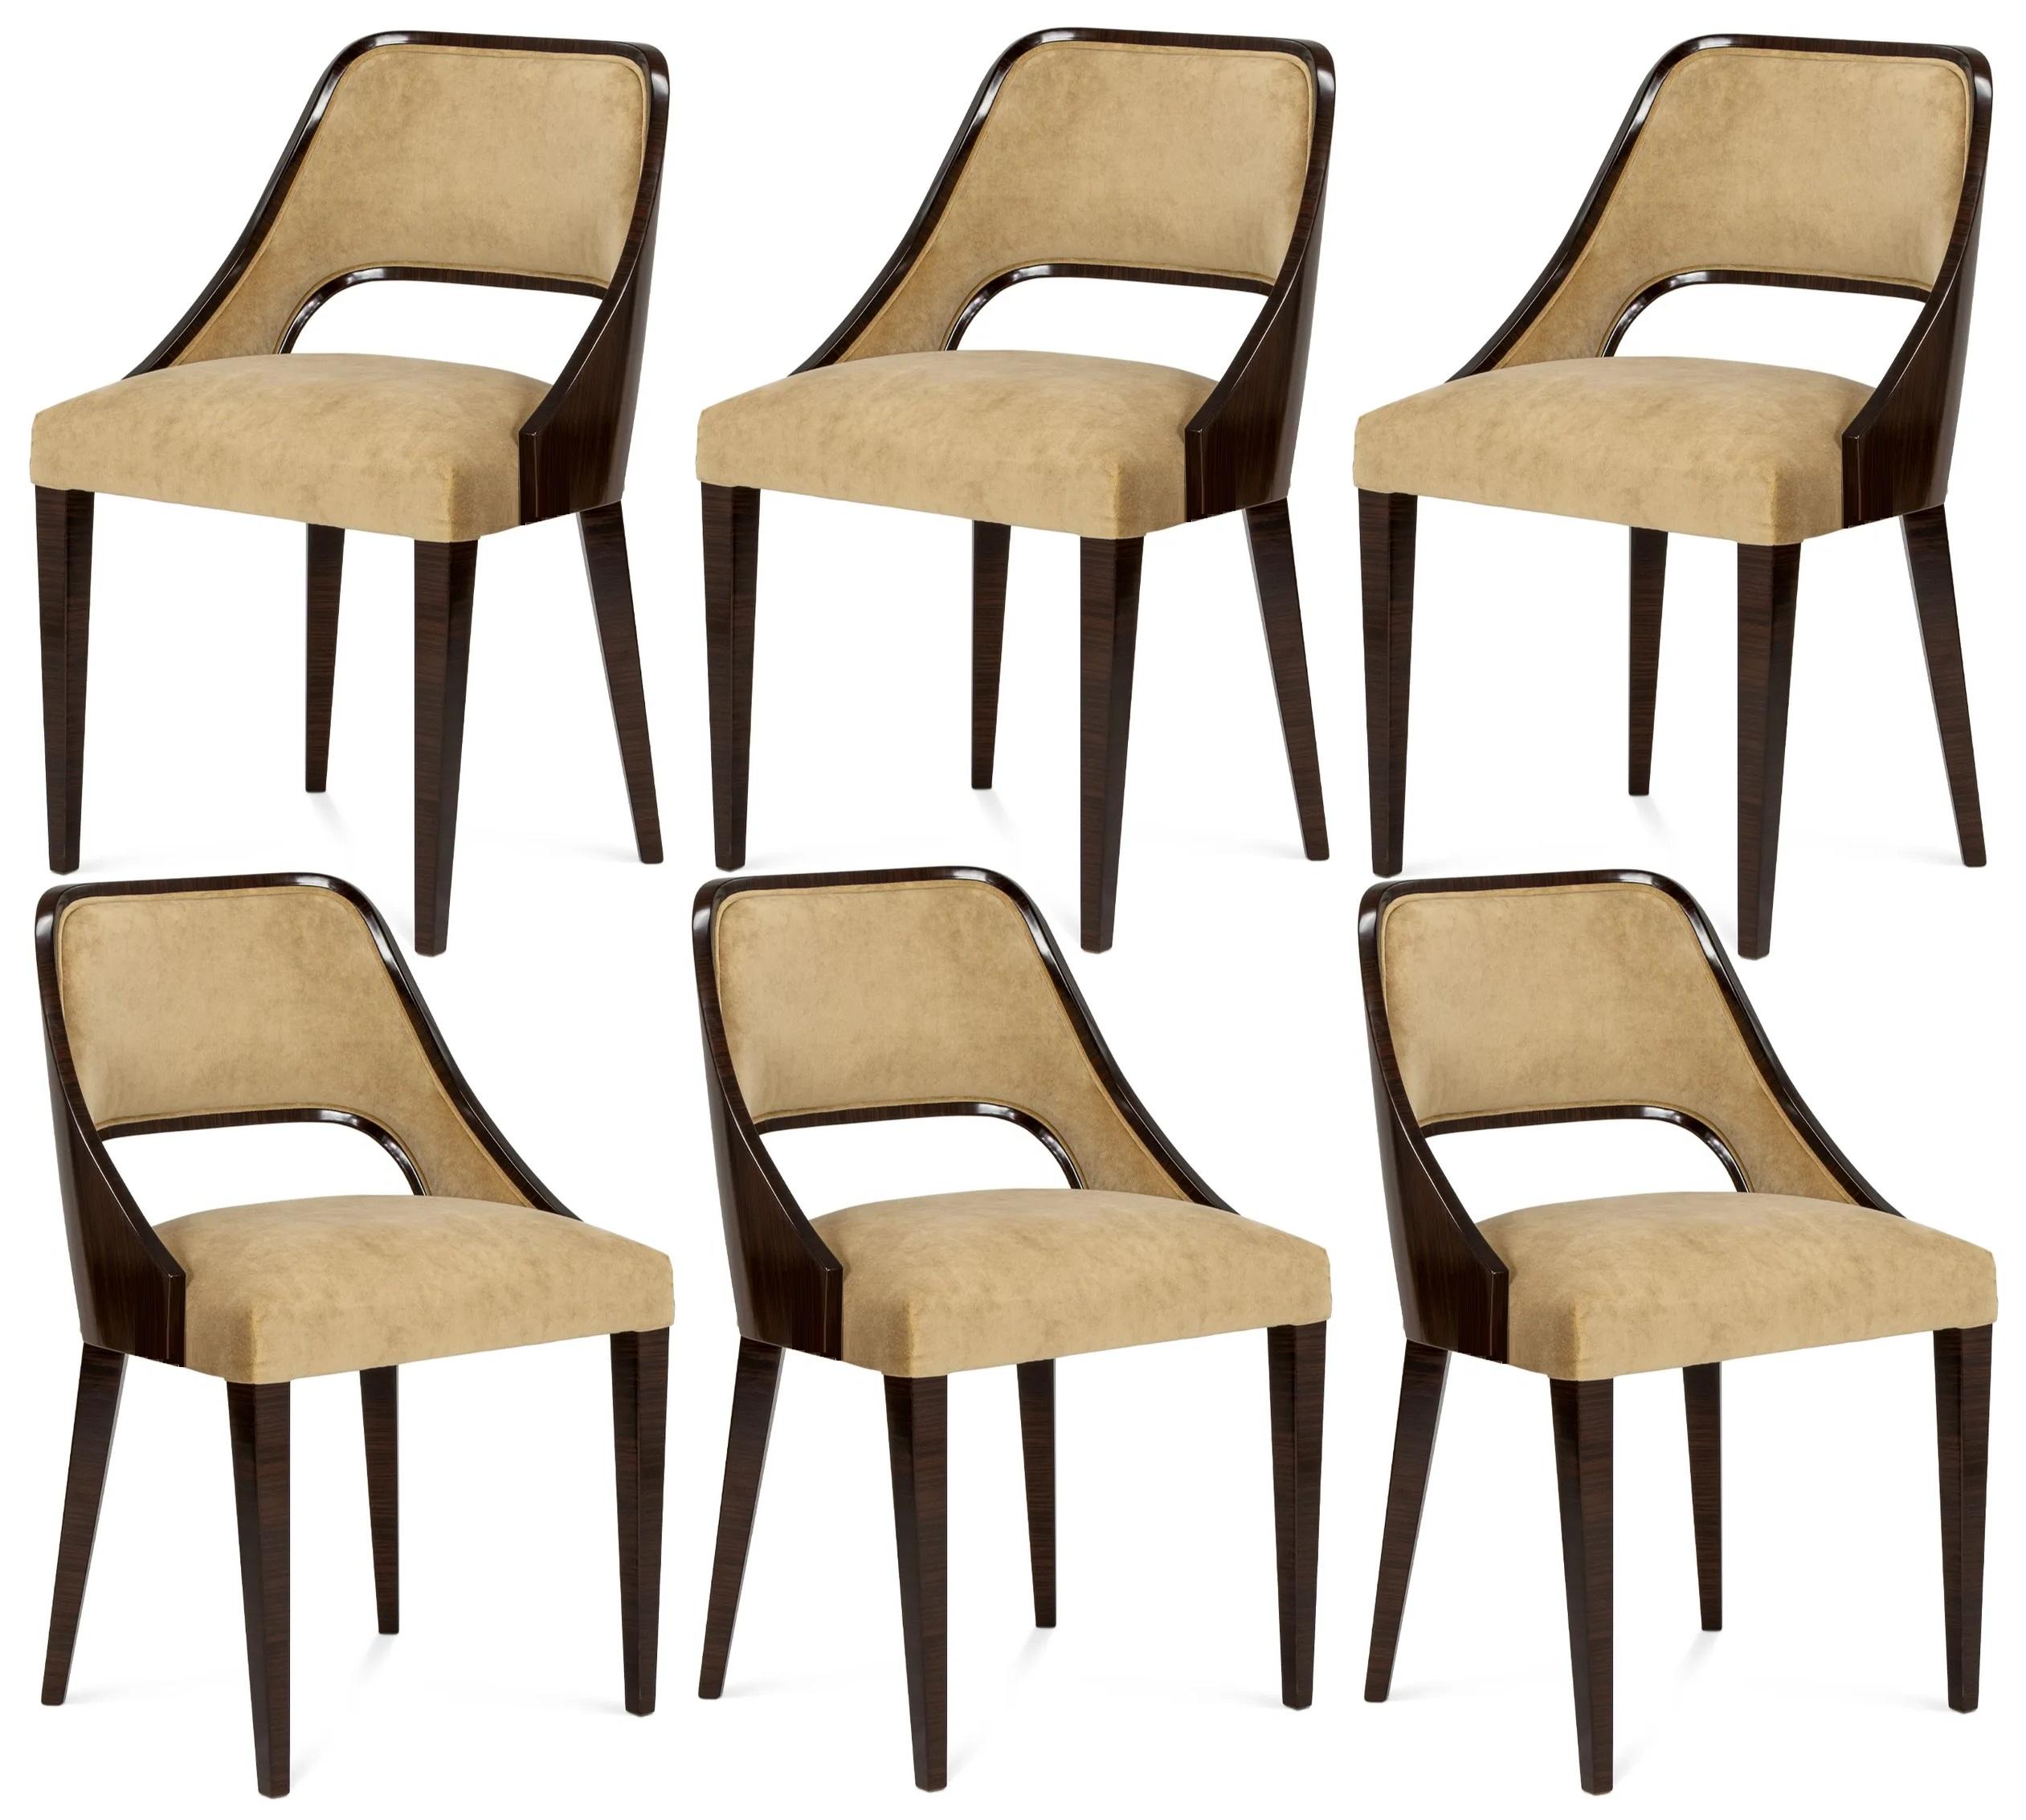 Art Deco Style Dining Chair With Back And Legs In Ebony Wood, Set of 6 For Sale